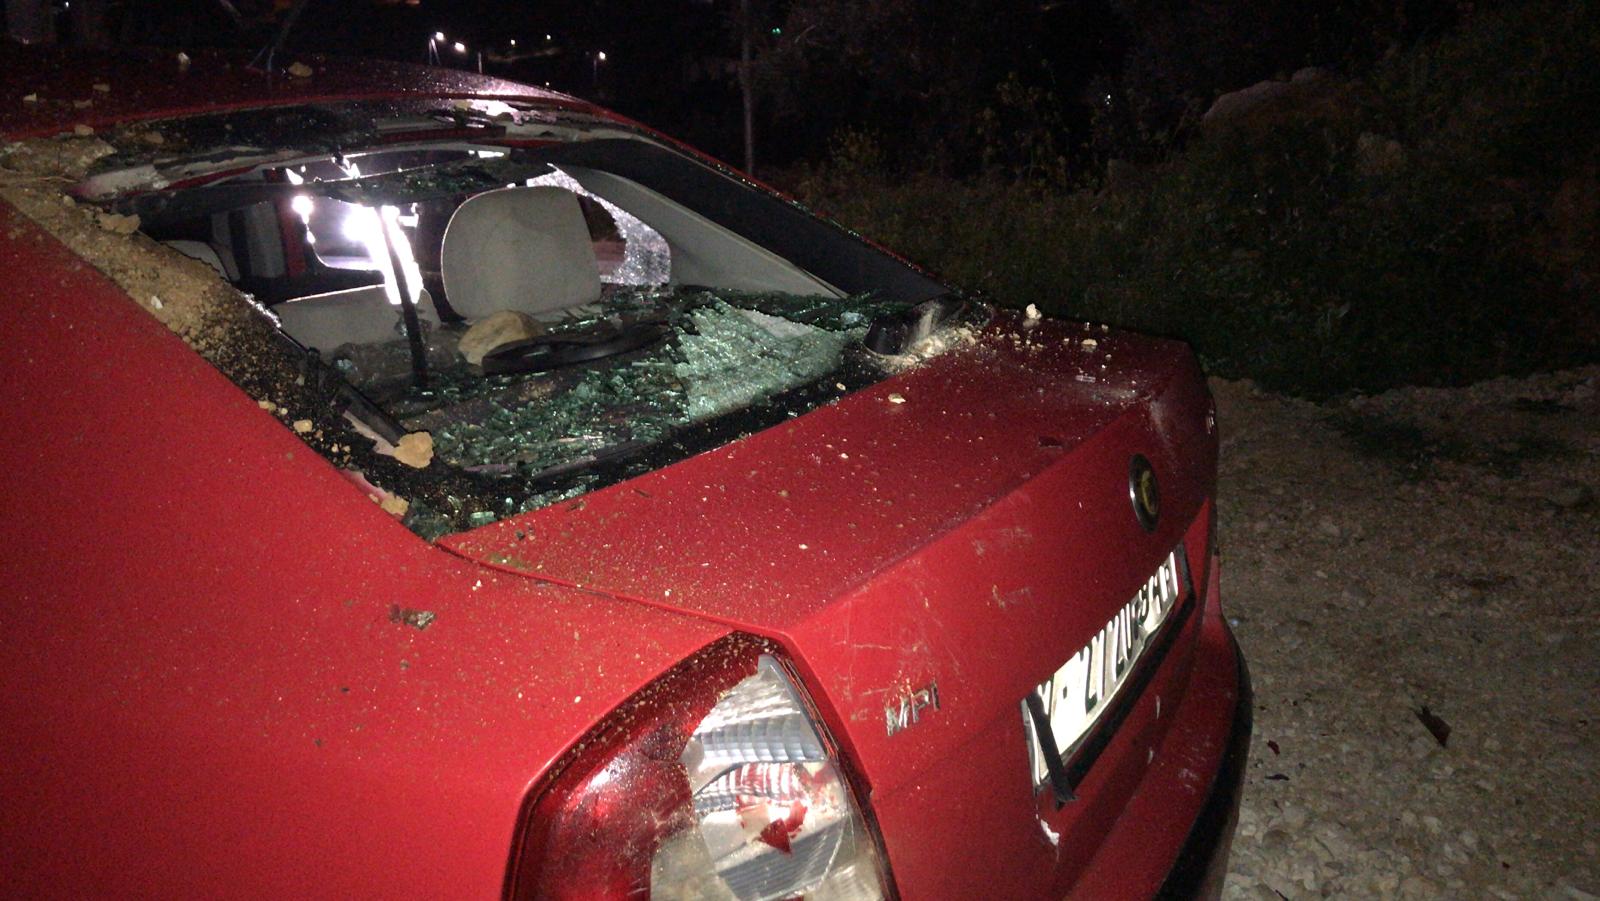 A car window smashed by settlers under the Dmeidi family home, Huwarah, 2 Mar. 2021. Photo courtesy of the Dmeidi family